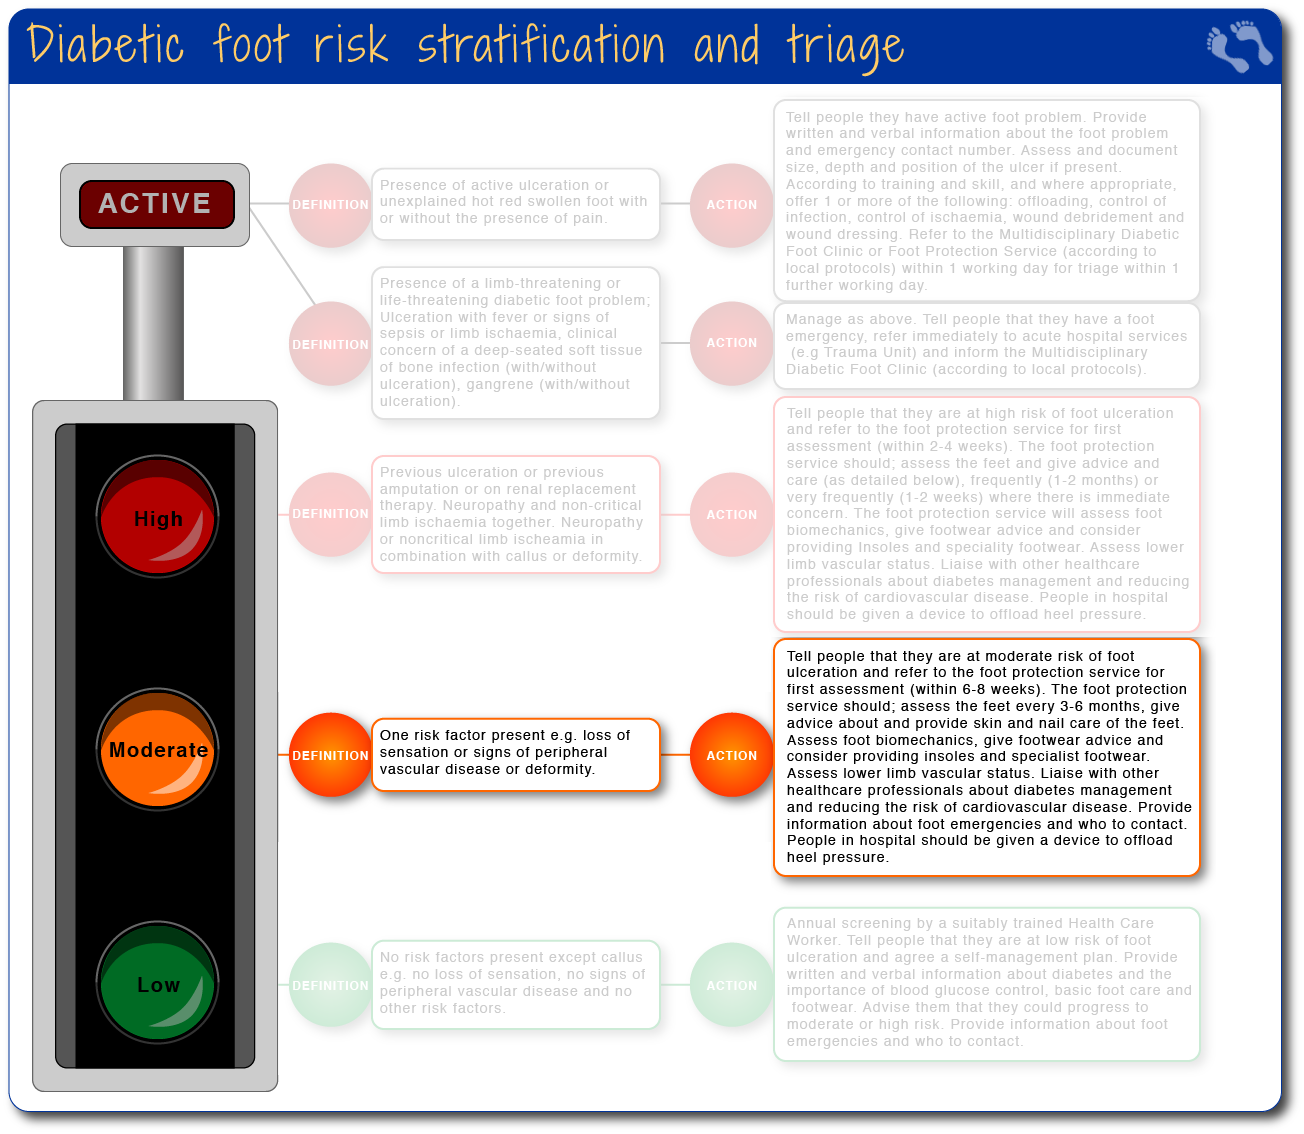 Diabetic foot risk stratification and triage - moderate risk